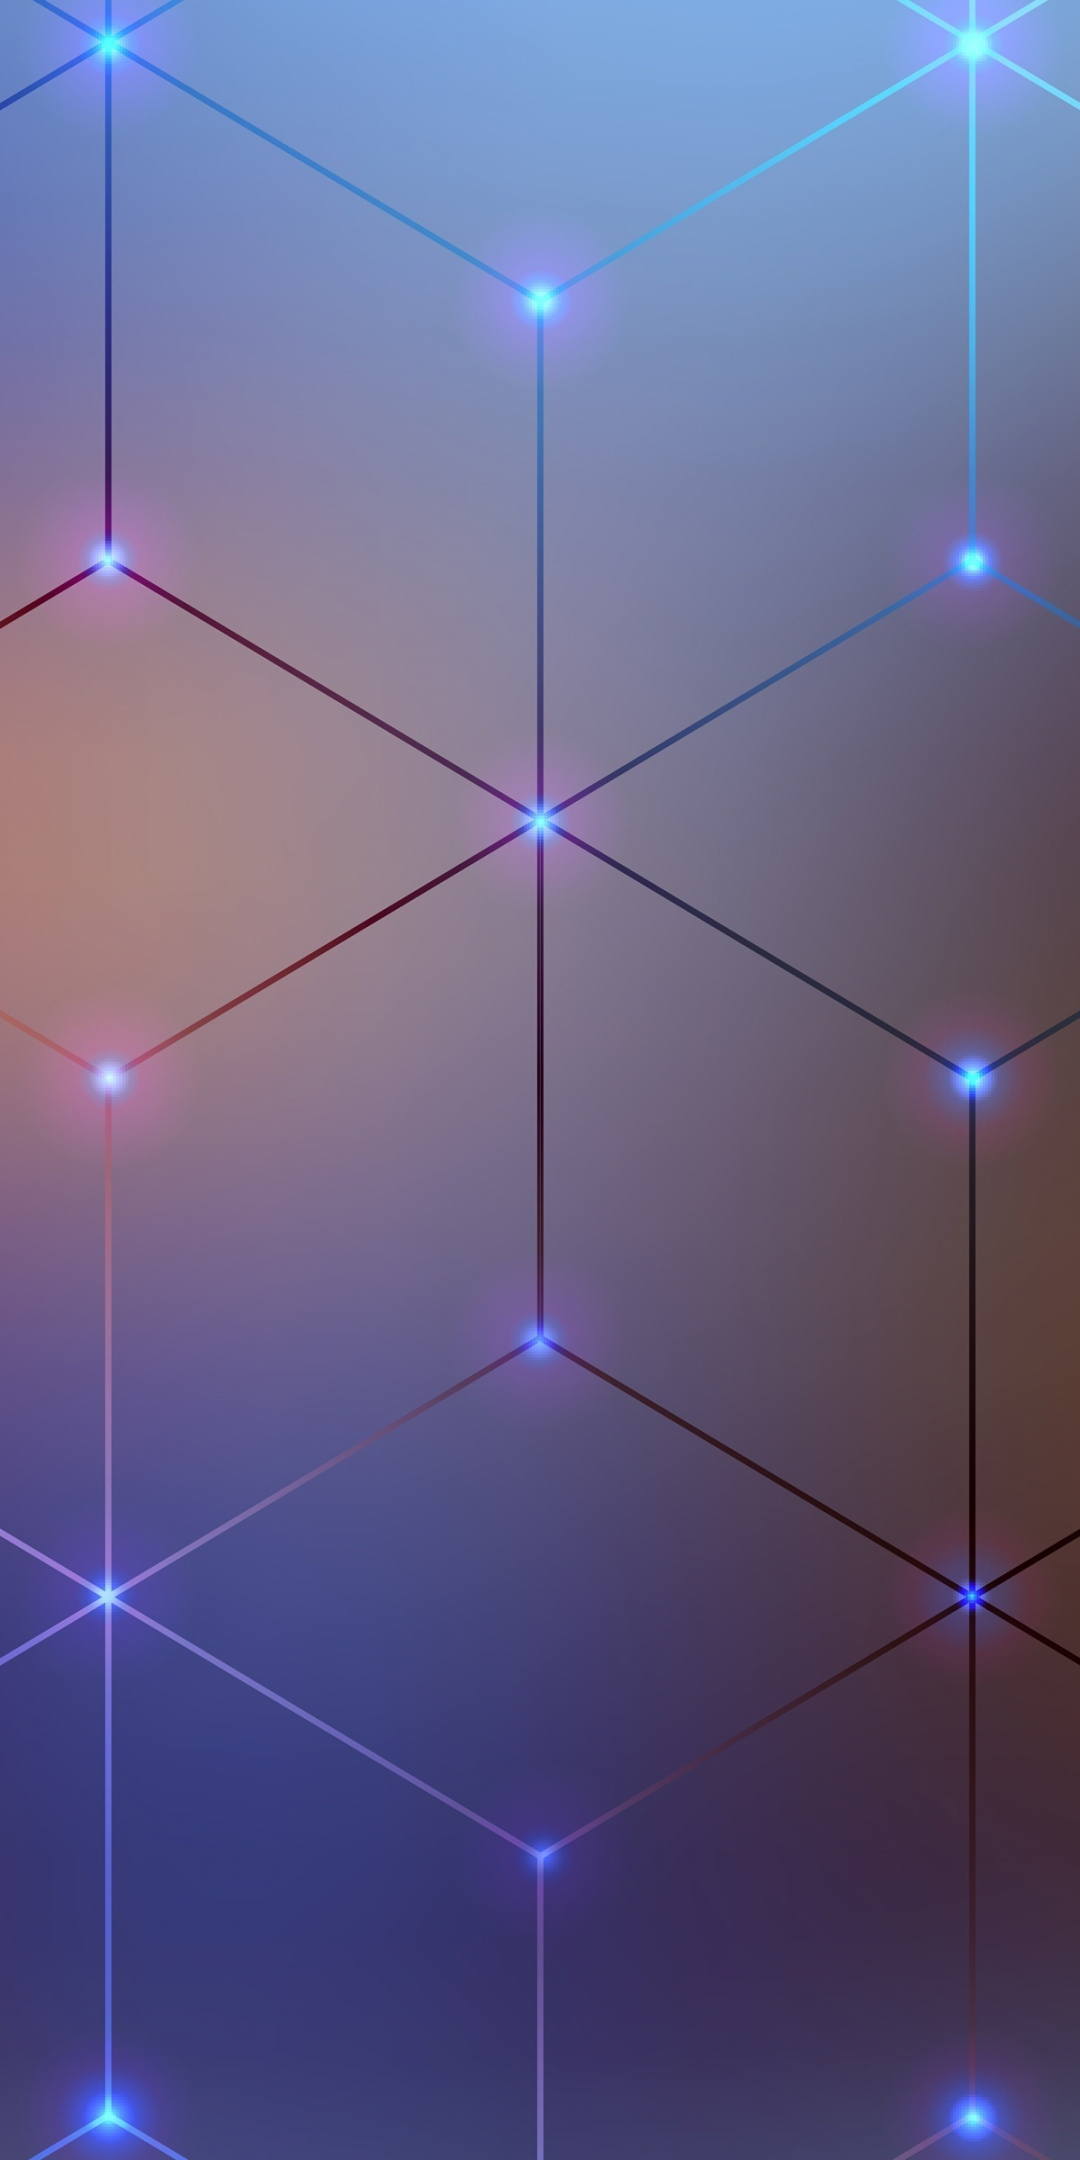 Cubes, grid, pattern, abstract, 1080x2160 wallpaper